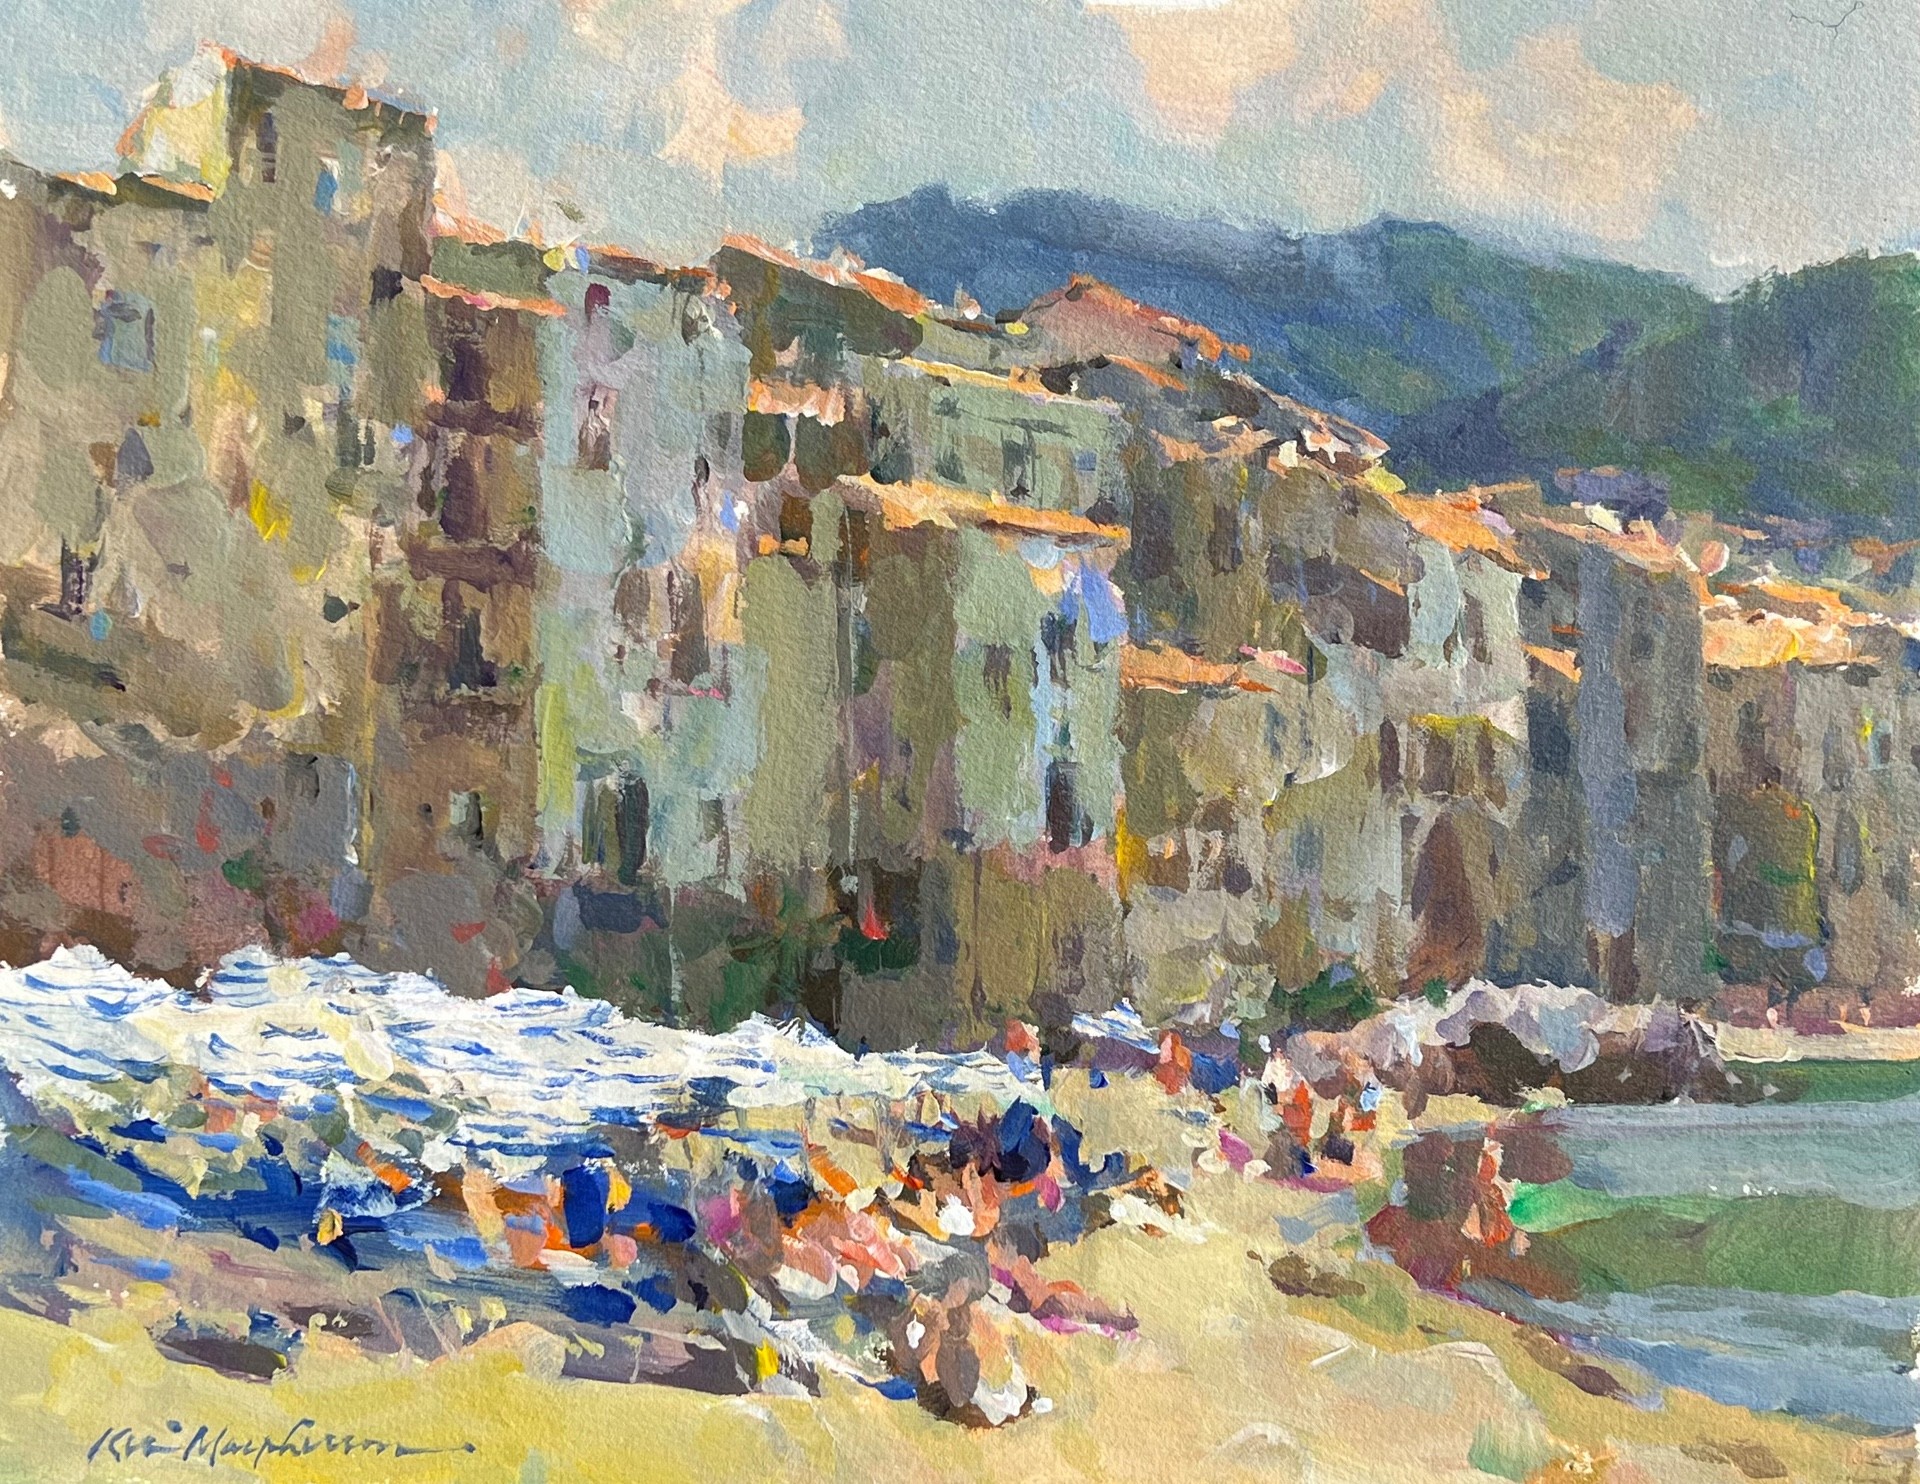 Kevin Macpherson, “Sicily Style,” Acrylic, 11 x 14 in.